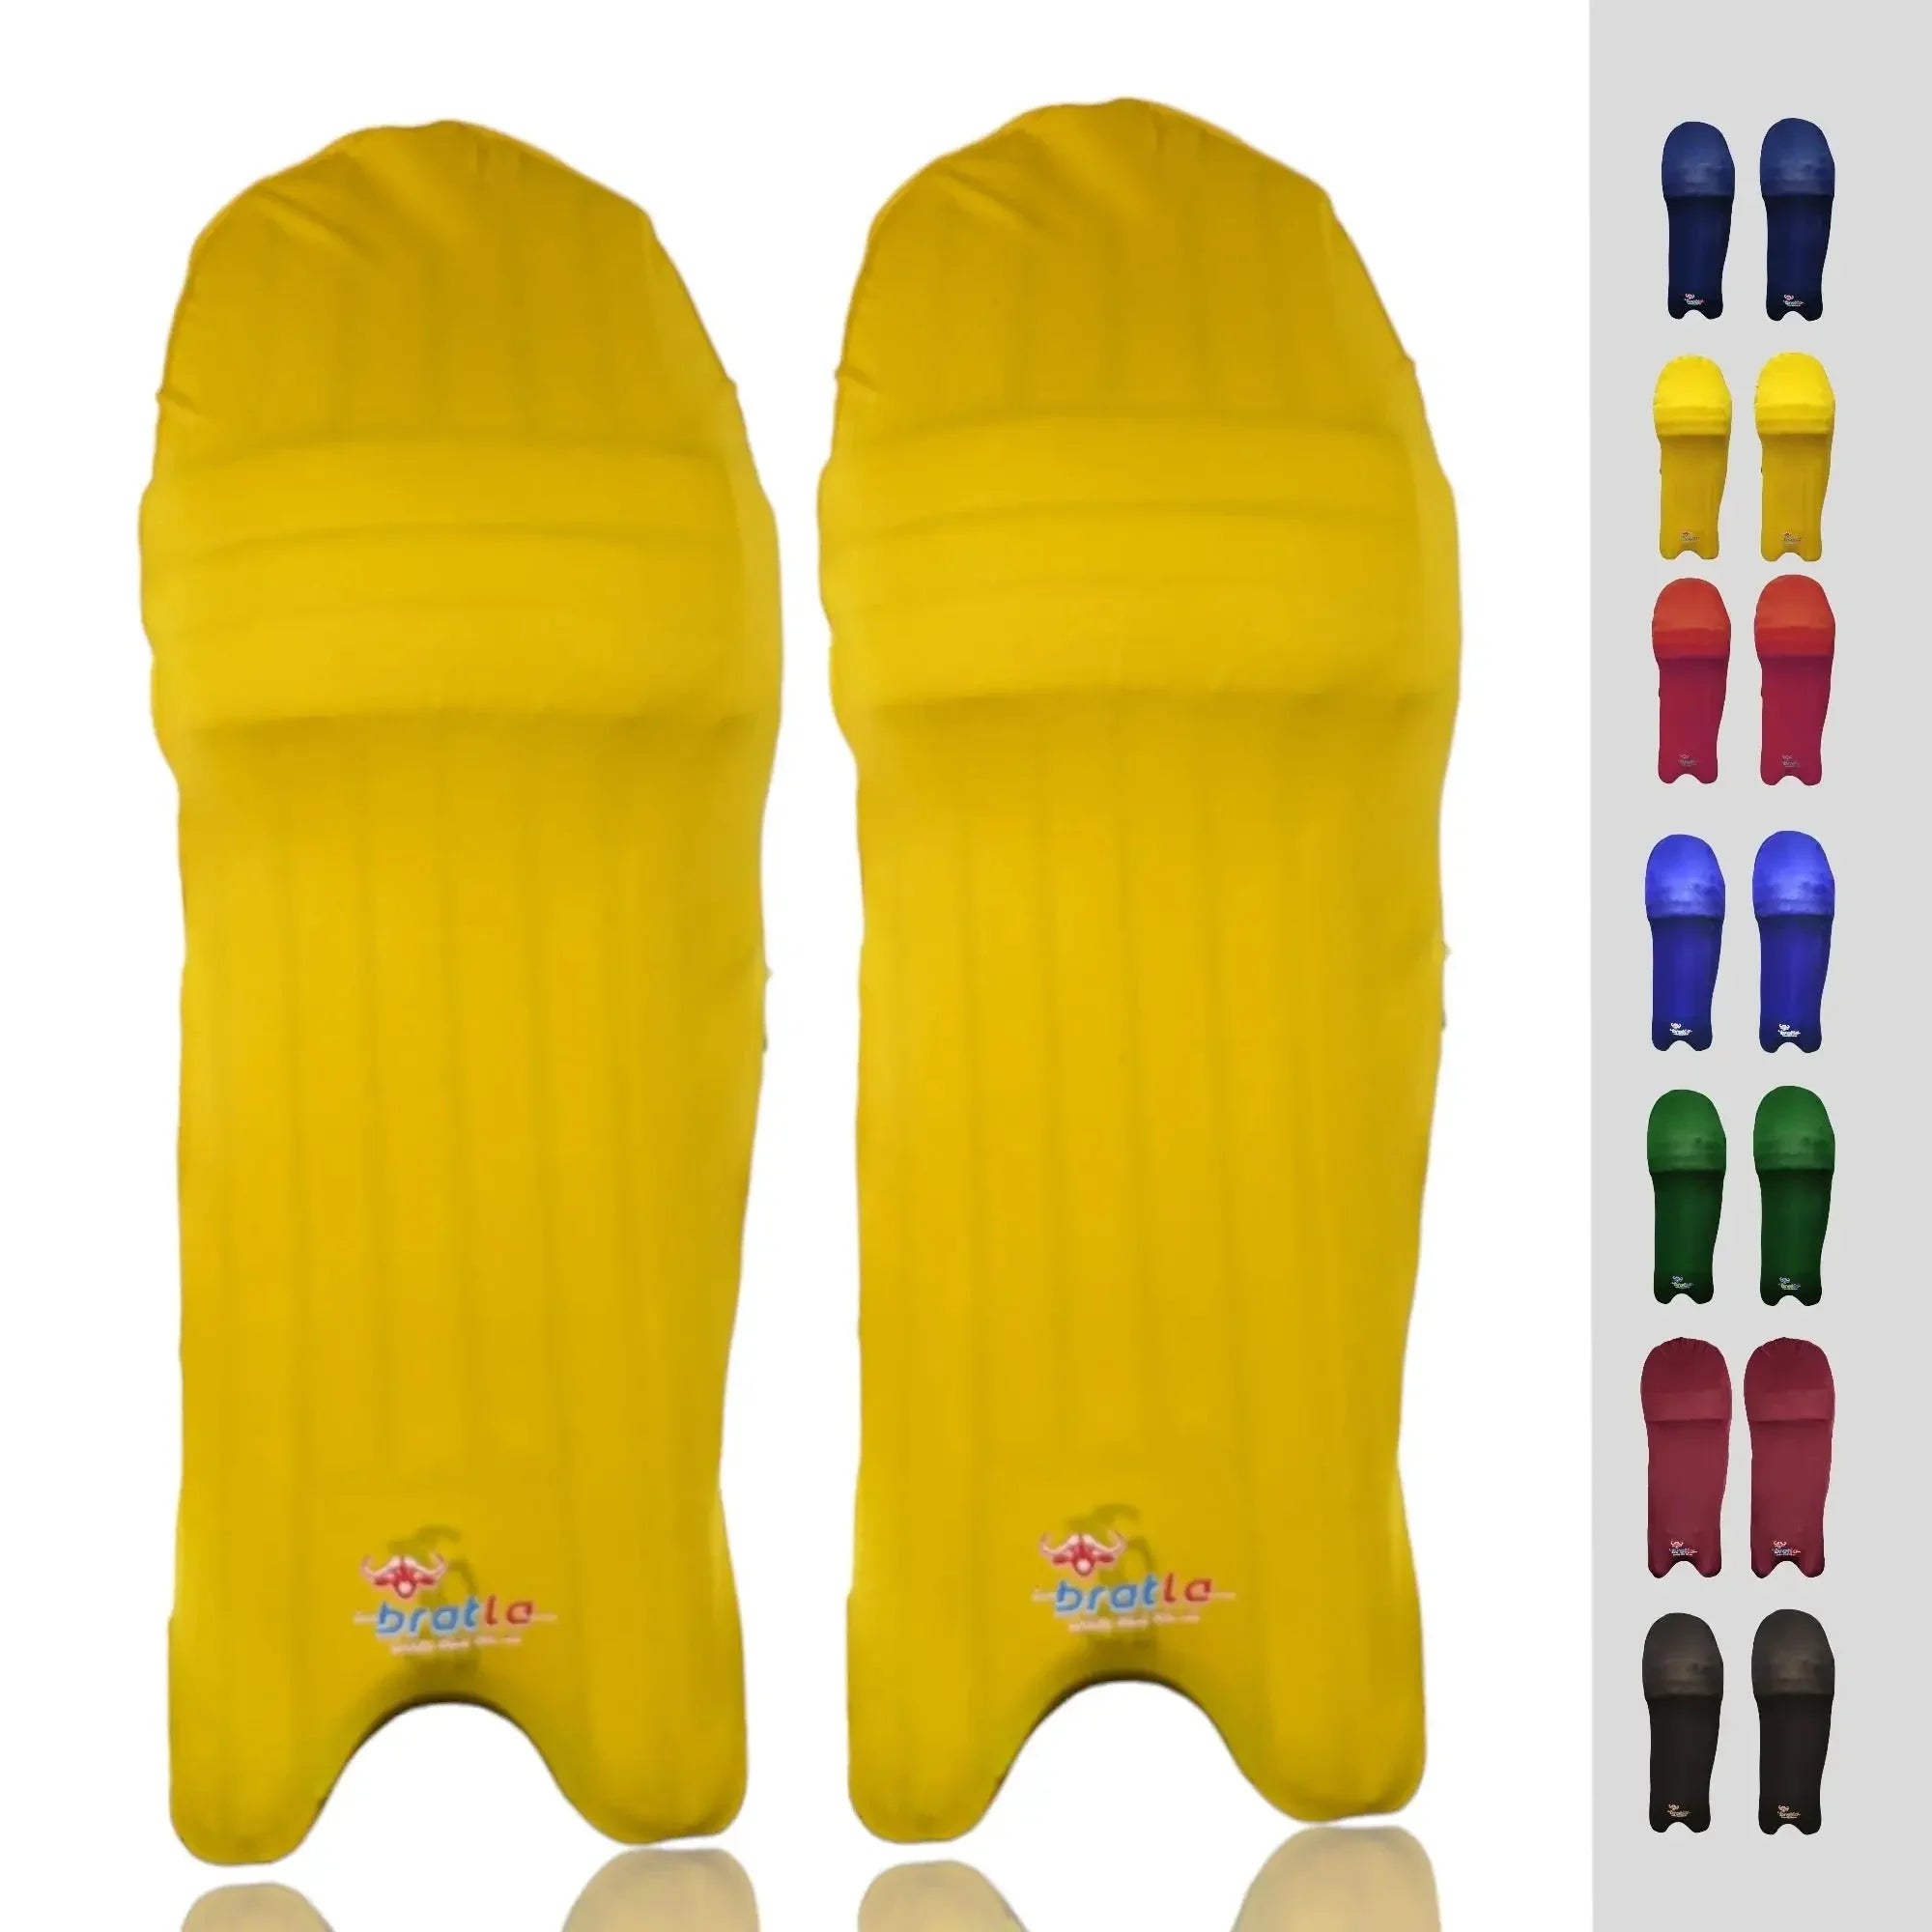 Bratla Cricket Batting Pad Covers Fit Neatly Easily Put On - Yellow - PADS - BATTING COVER